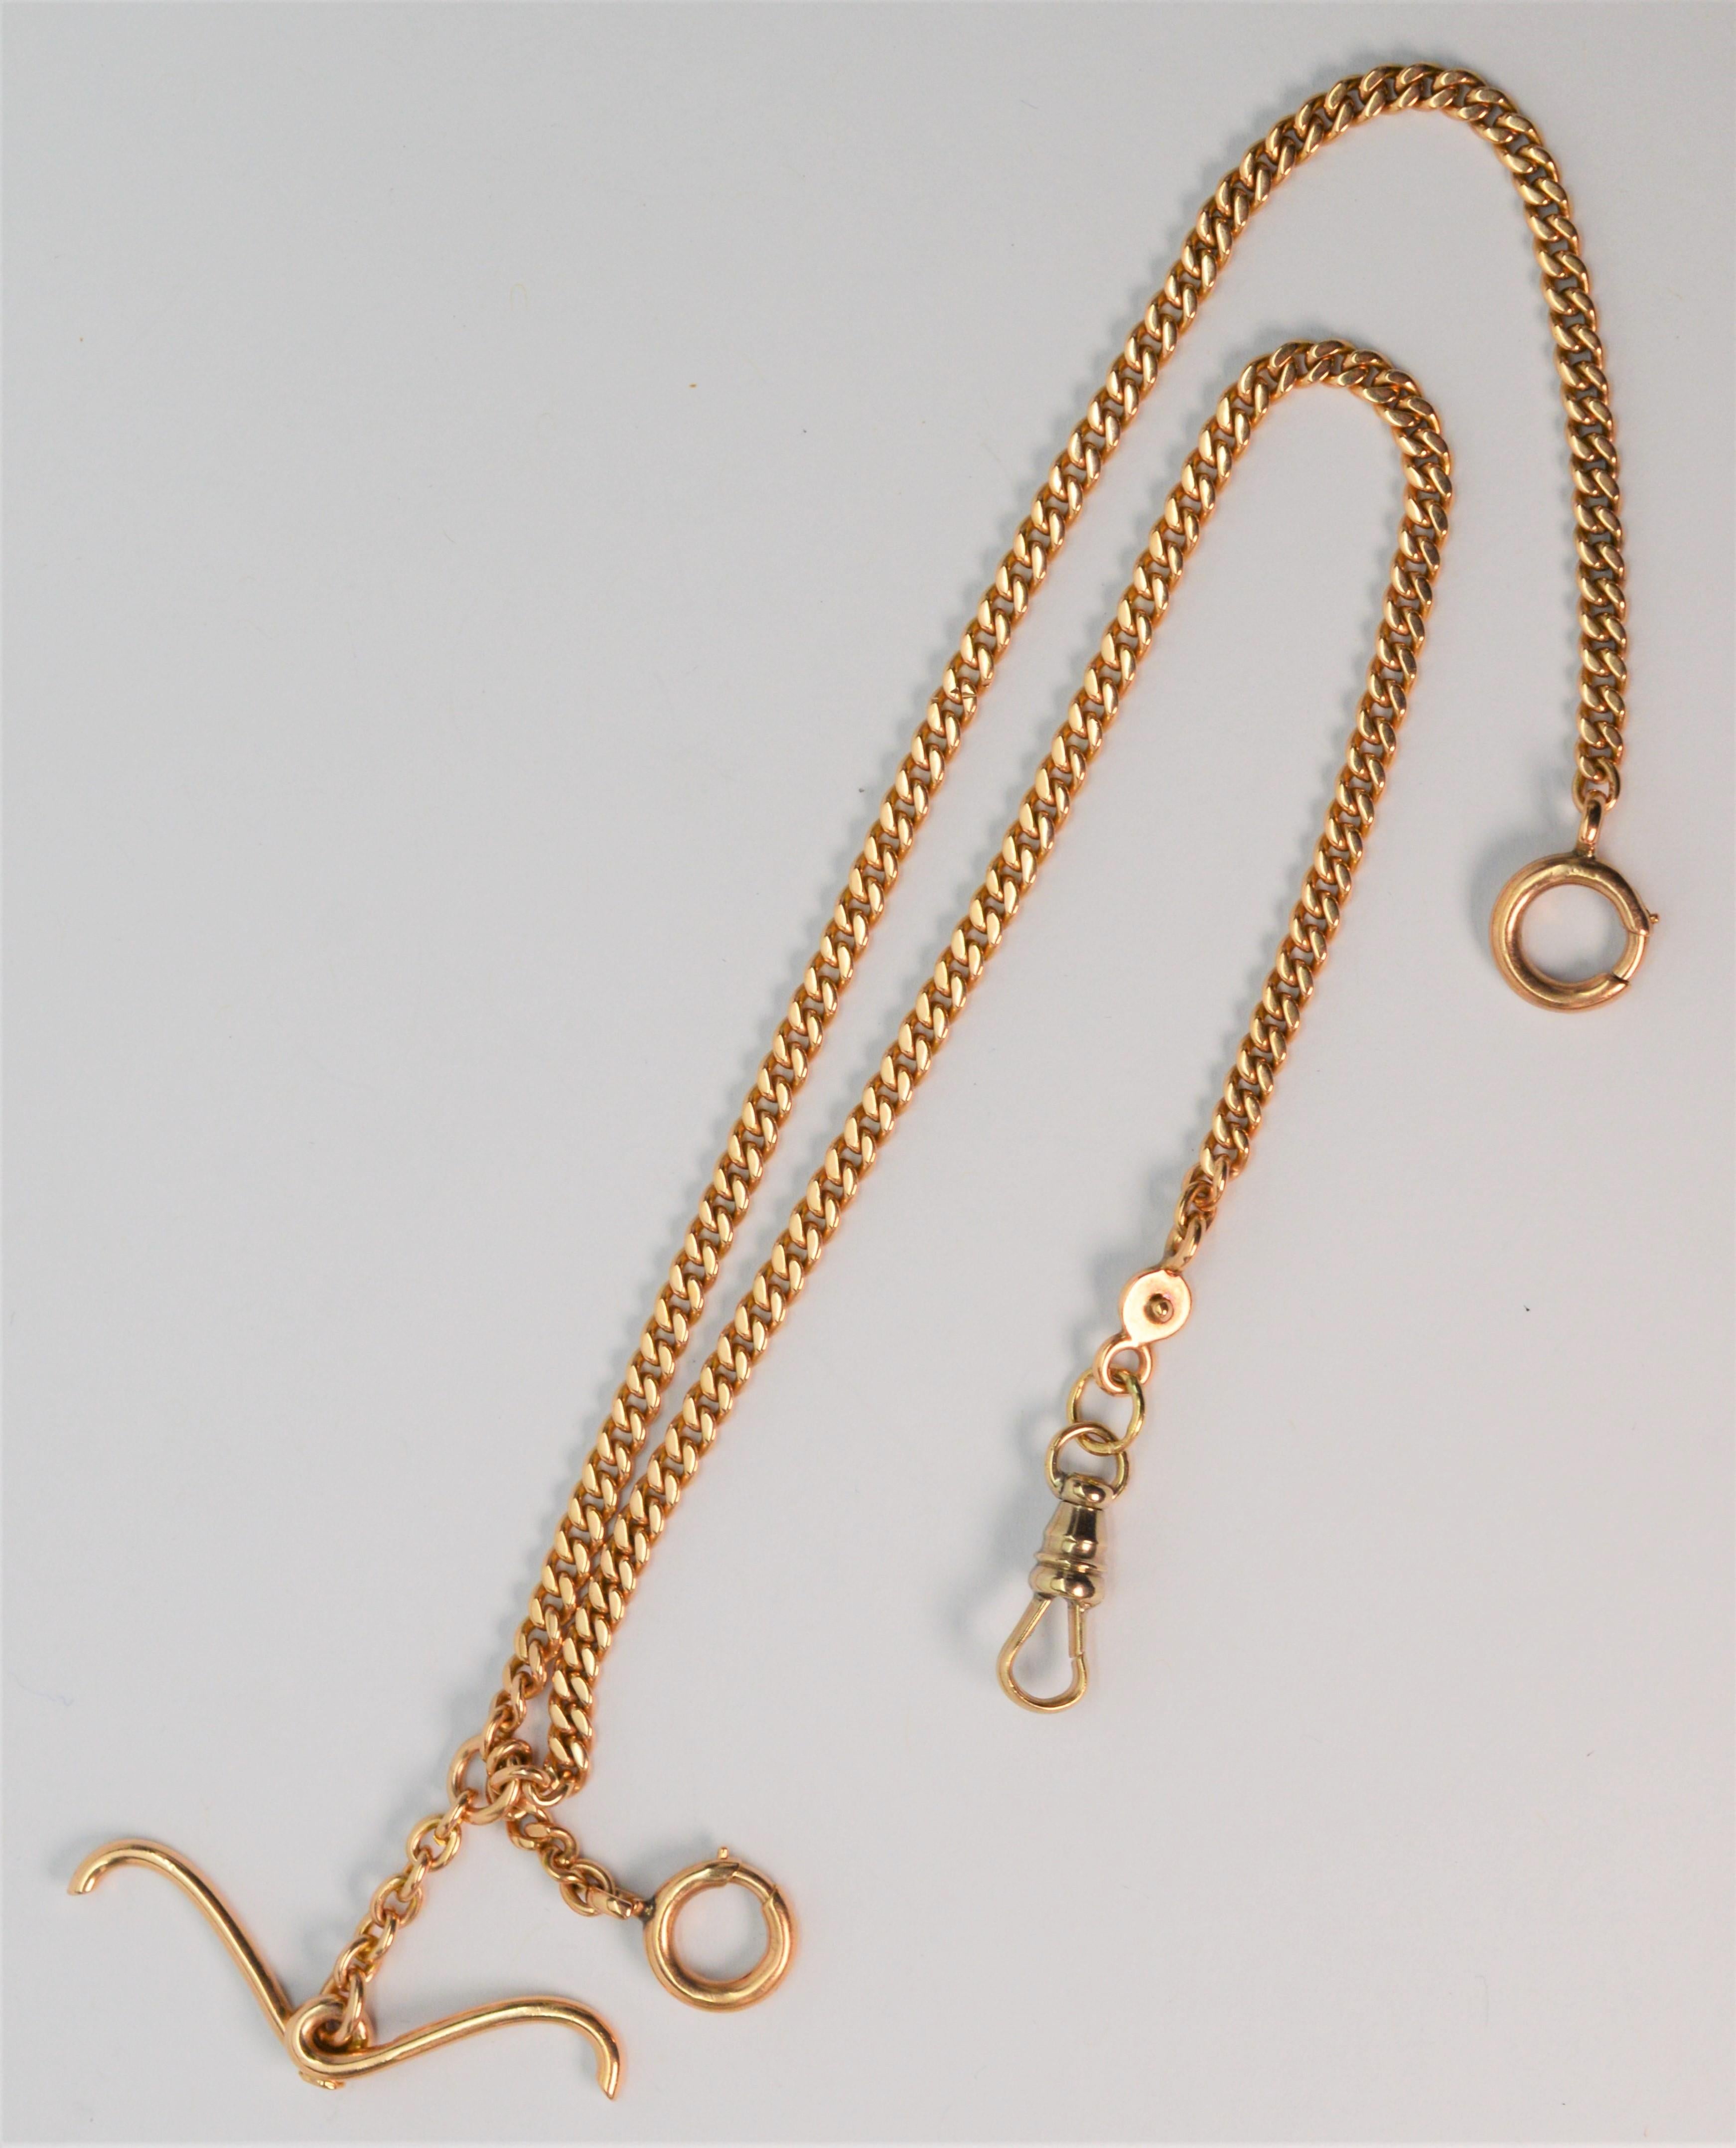 In 14 Karat yellow gold, this antique watch chain is nicely fitted with a fancy T bar, dog clip and double fob chains with spring ring closures. From the T bar, the length of chain to the dog clip is 8.75 inches. From the T bar the longer length of